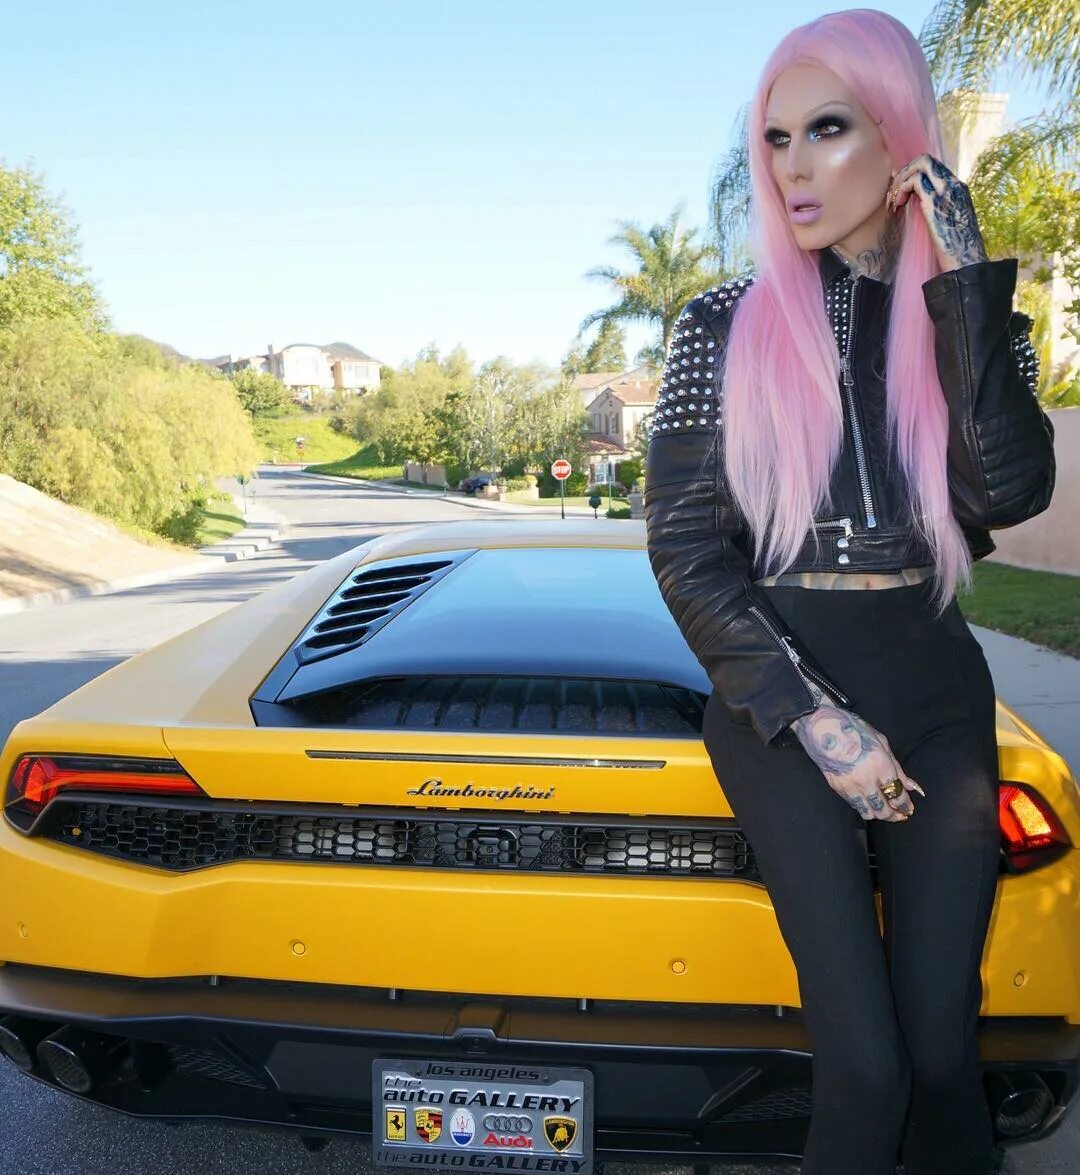 Jeffree Star on Instagram: "I stand for freedom of expression, doing w...